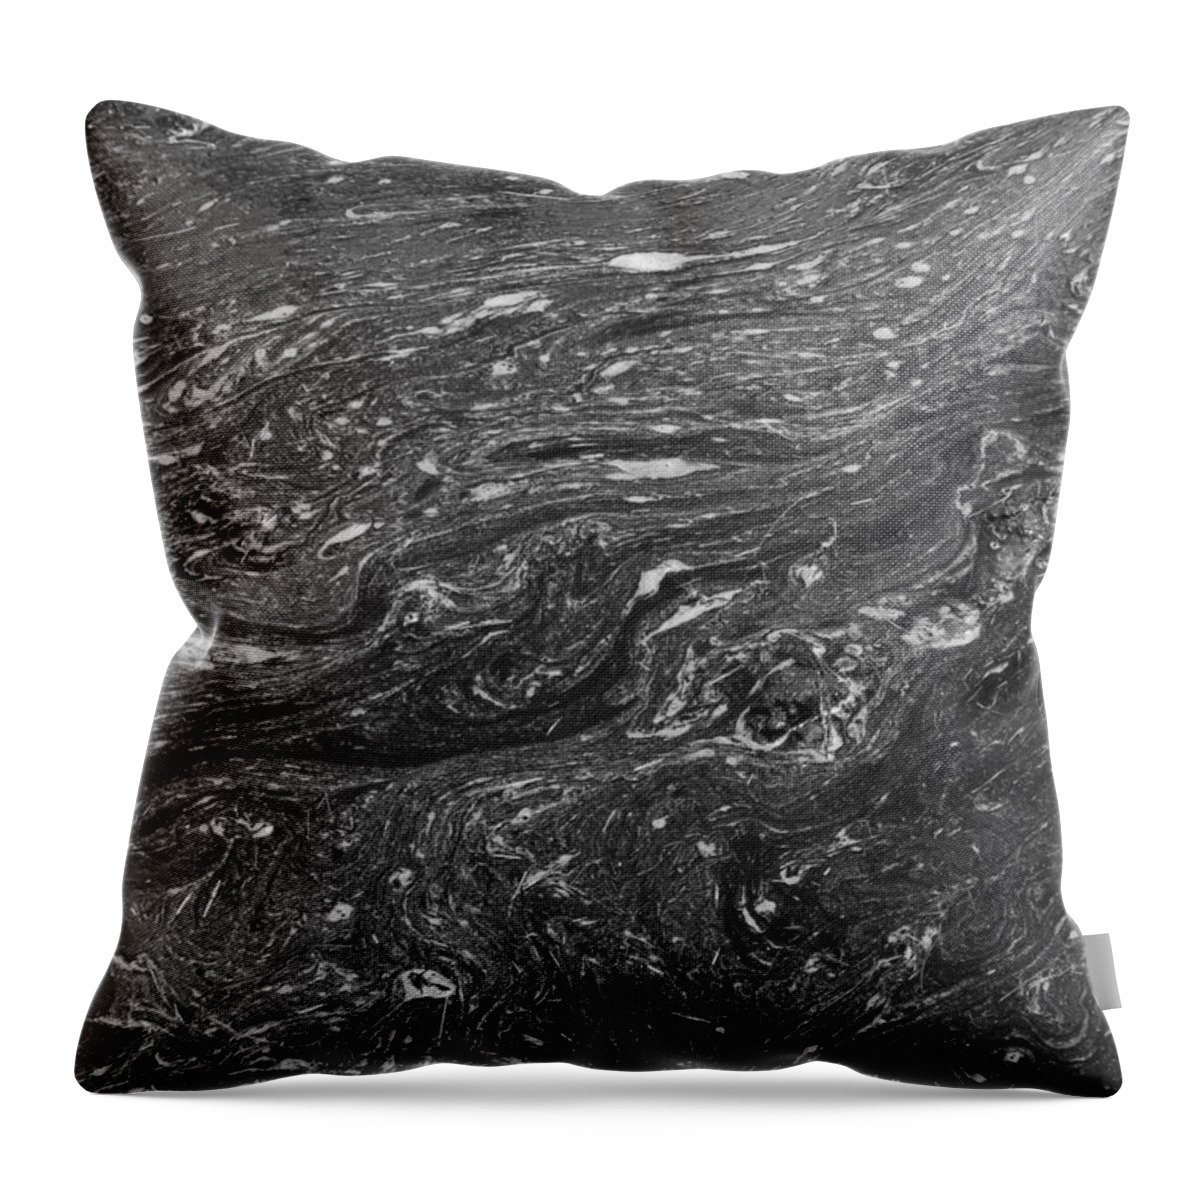 Mud Throw Pillow featuring the photograph Muddy Water by Christopher Perez